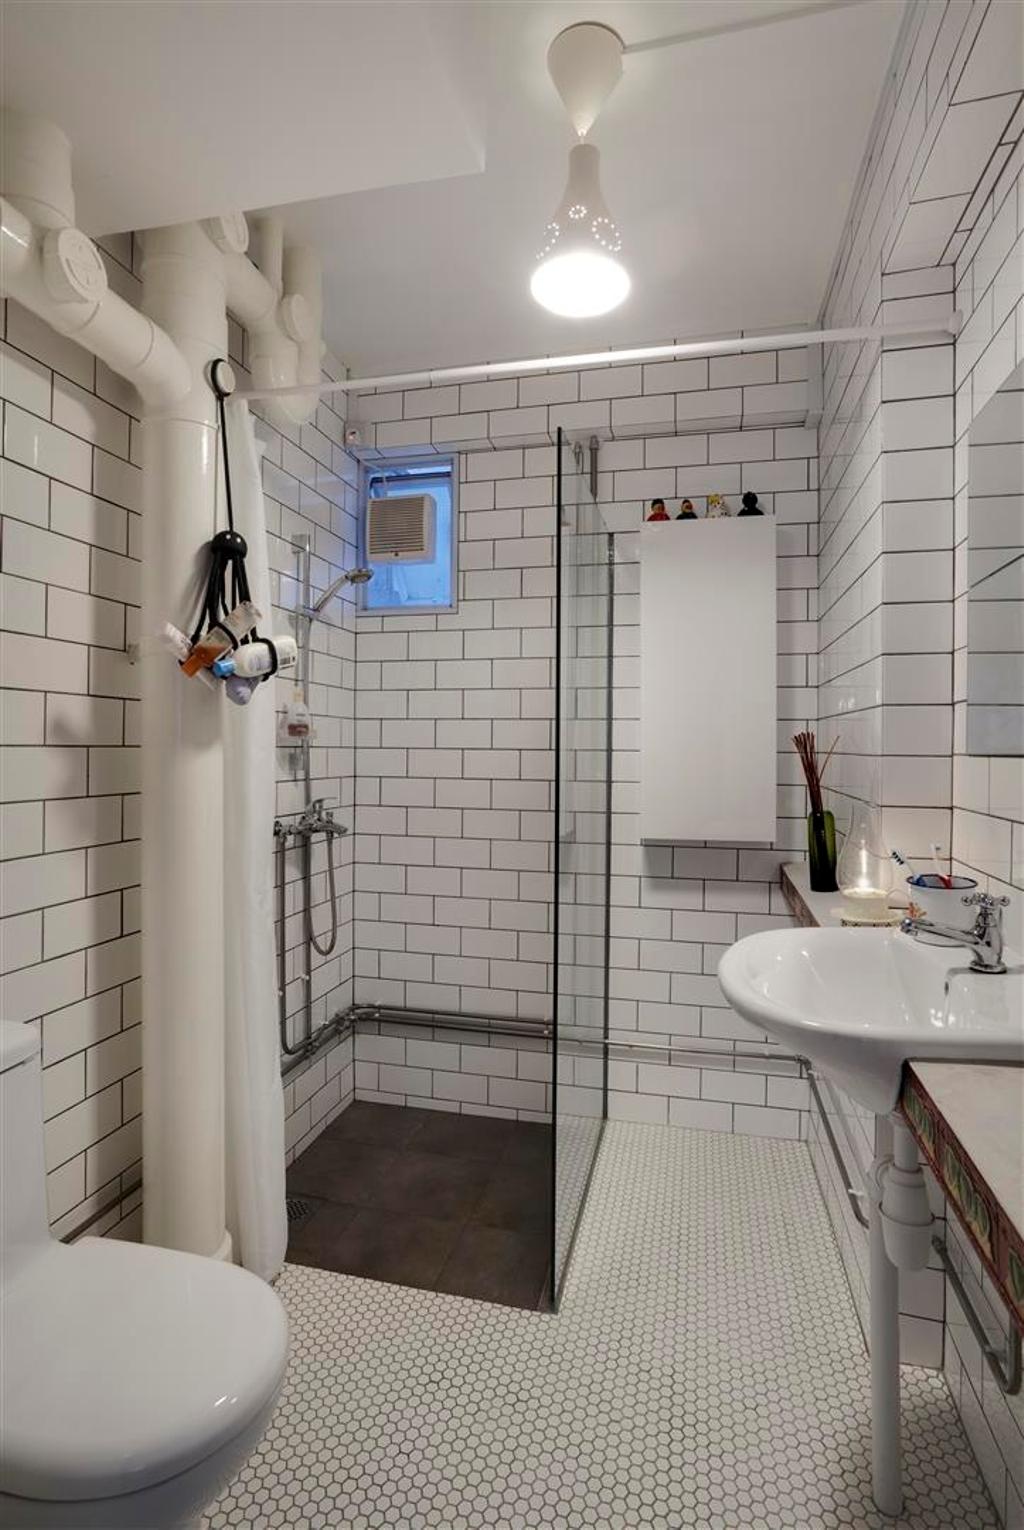 Eclectic, HDB, Bathroom, Ghim Moh, Interior Designer, The Design Practice, White Brick, Red Brick Wall, Glass Cubicle, Hanging Light, Lighting, Bathroom Counter, Cubicle, White, Monochrome, Indoors, Interior Design, Room